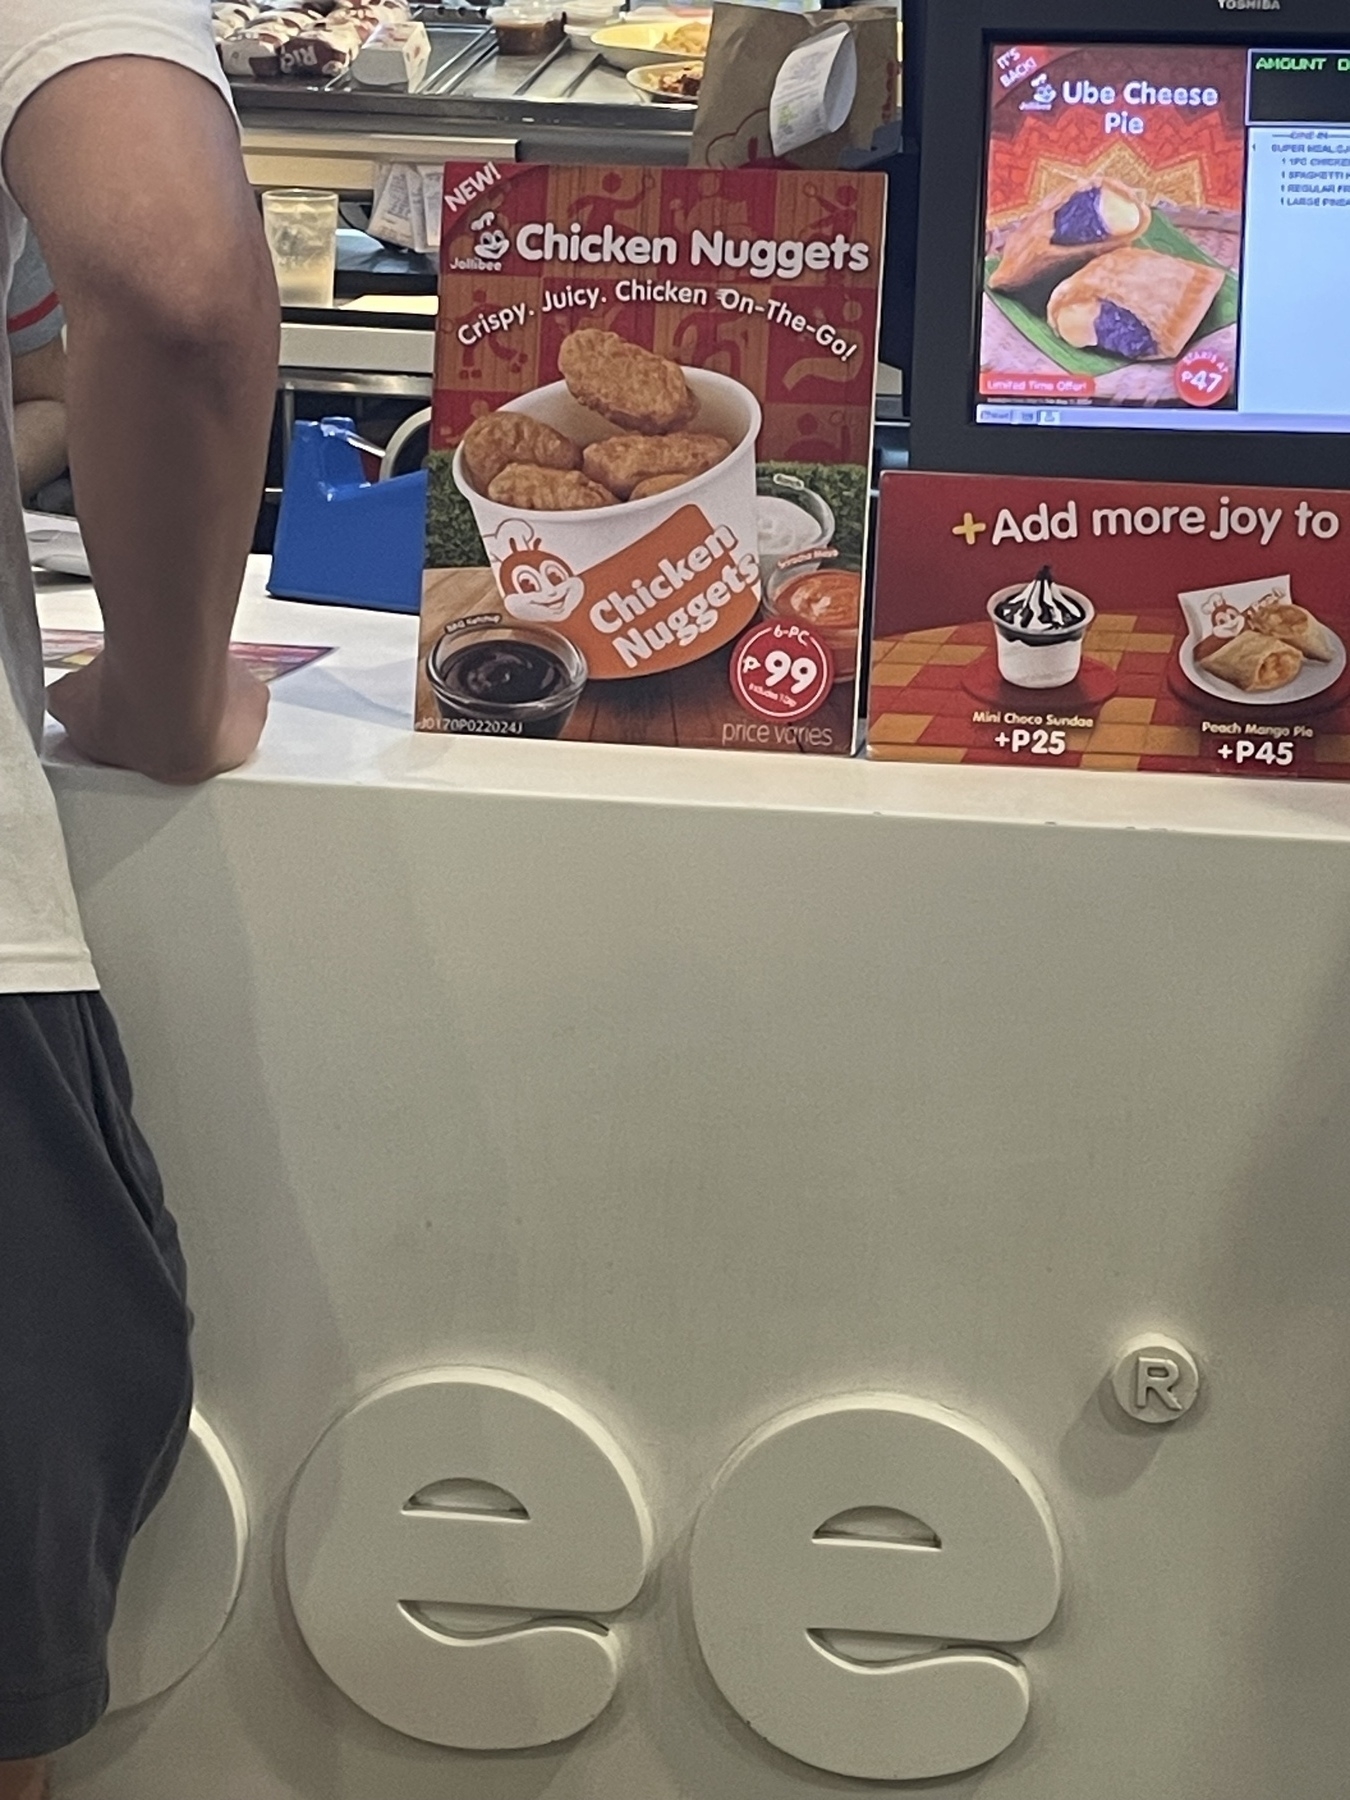 A promotional poster from Jollibee in front of their cashier registers sharing that Chicken Nuggets is now available.